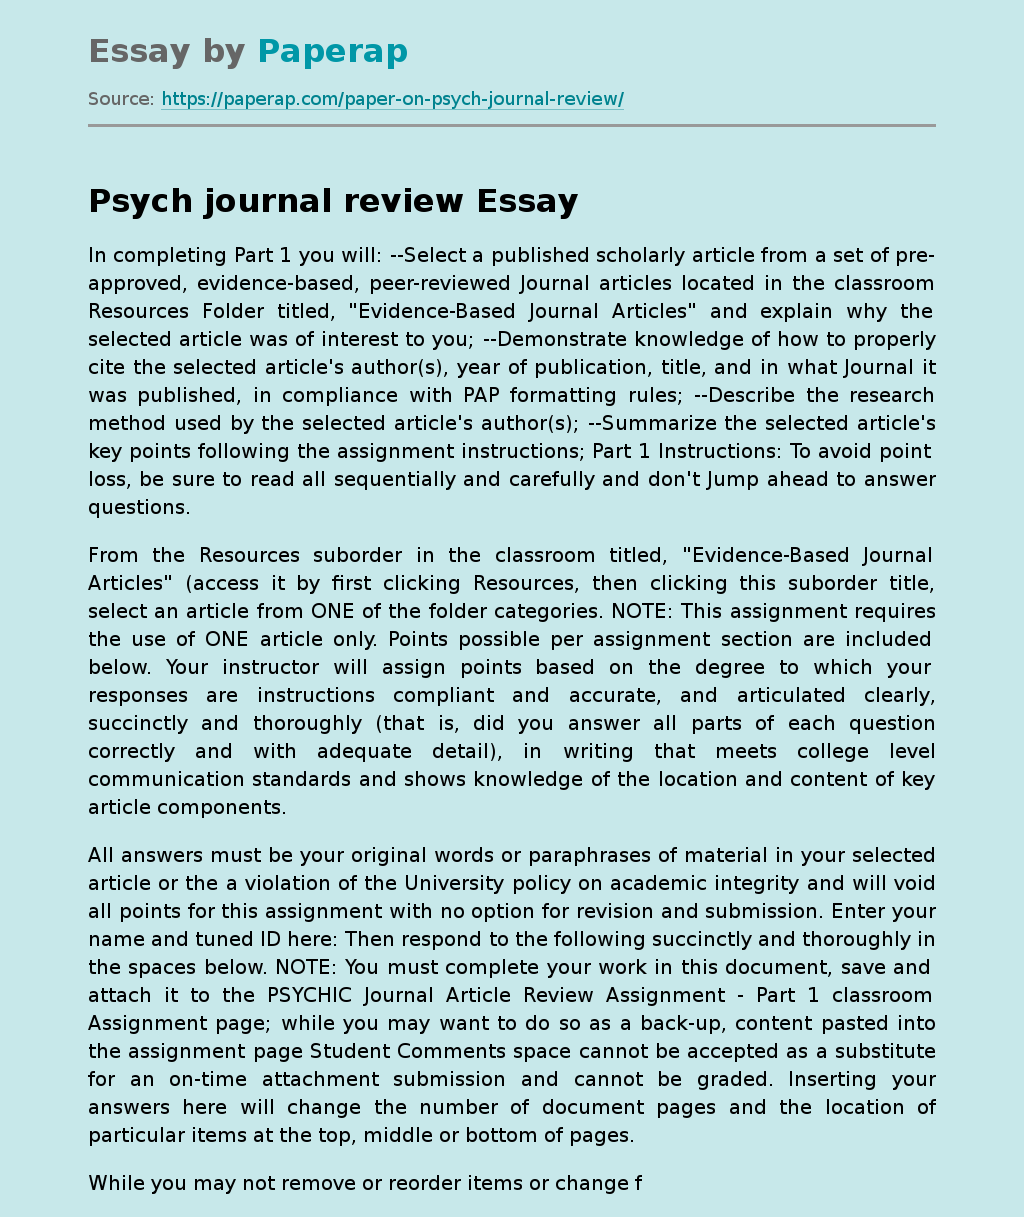 Psych journal review